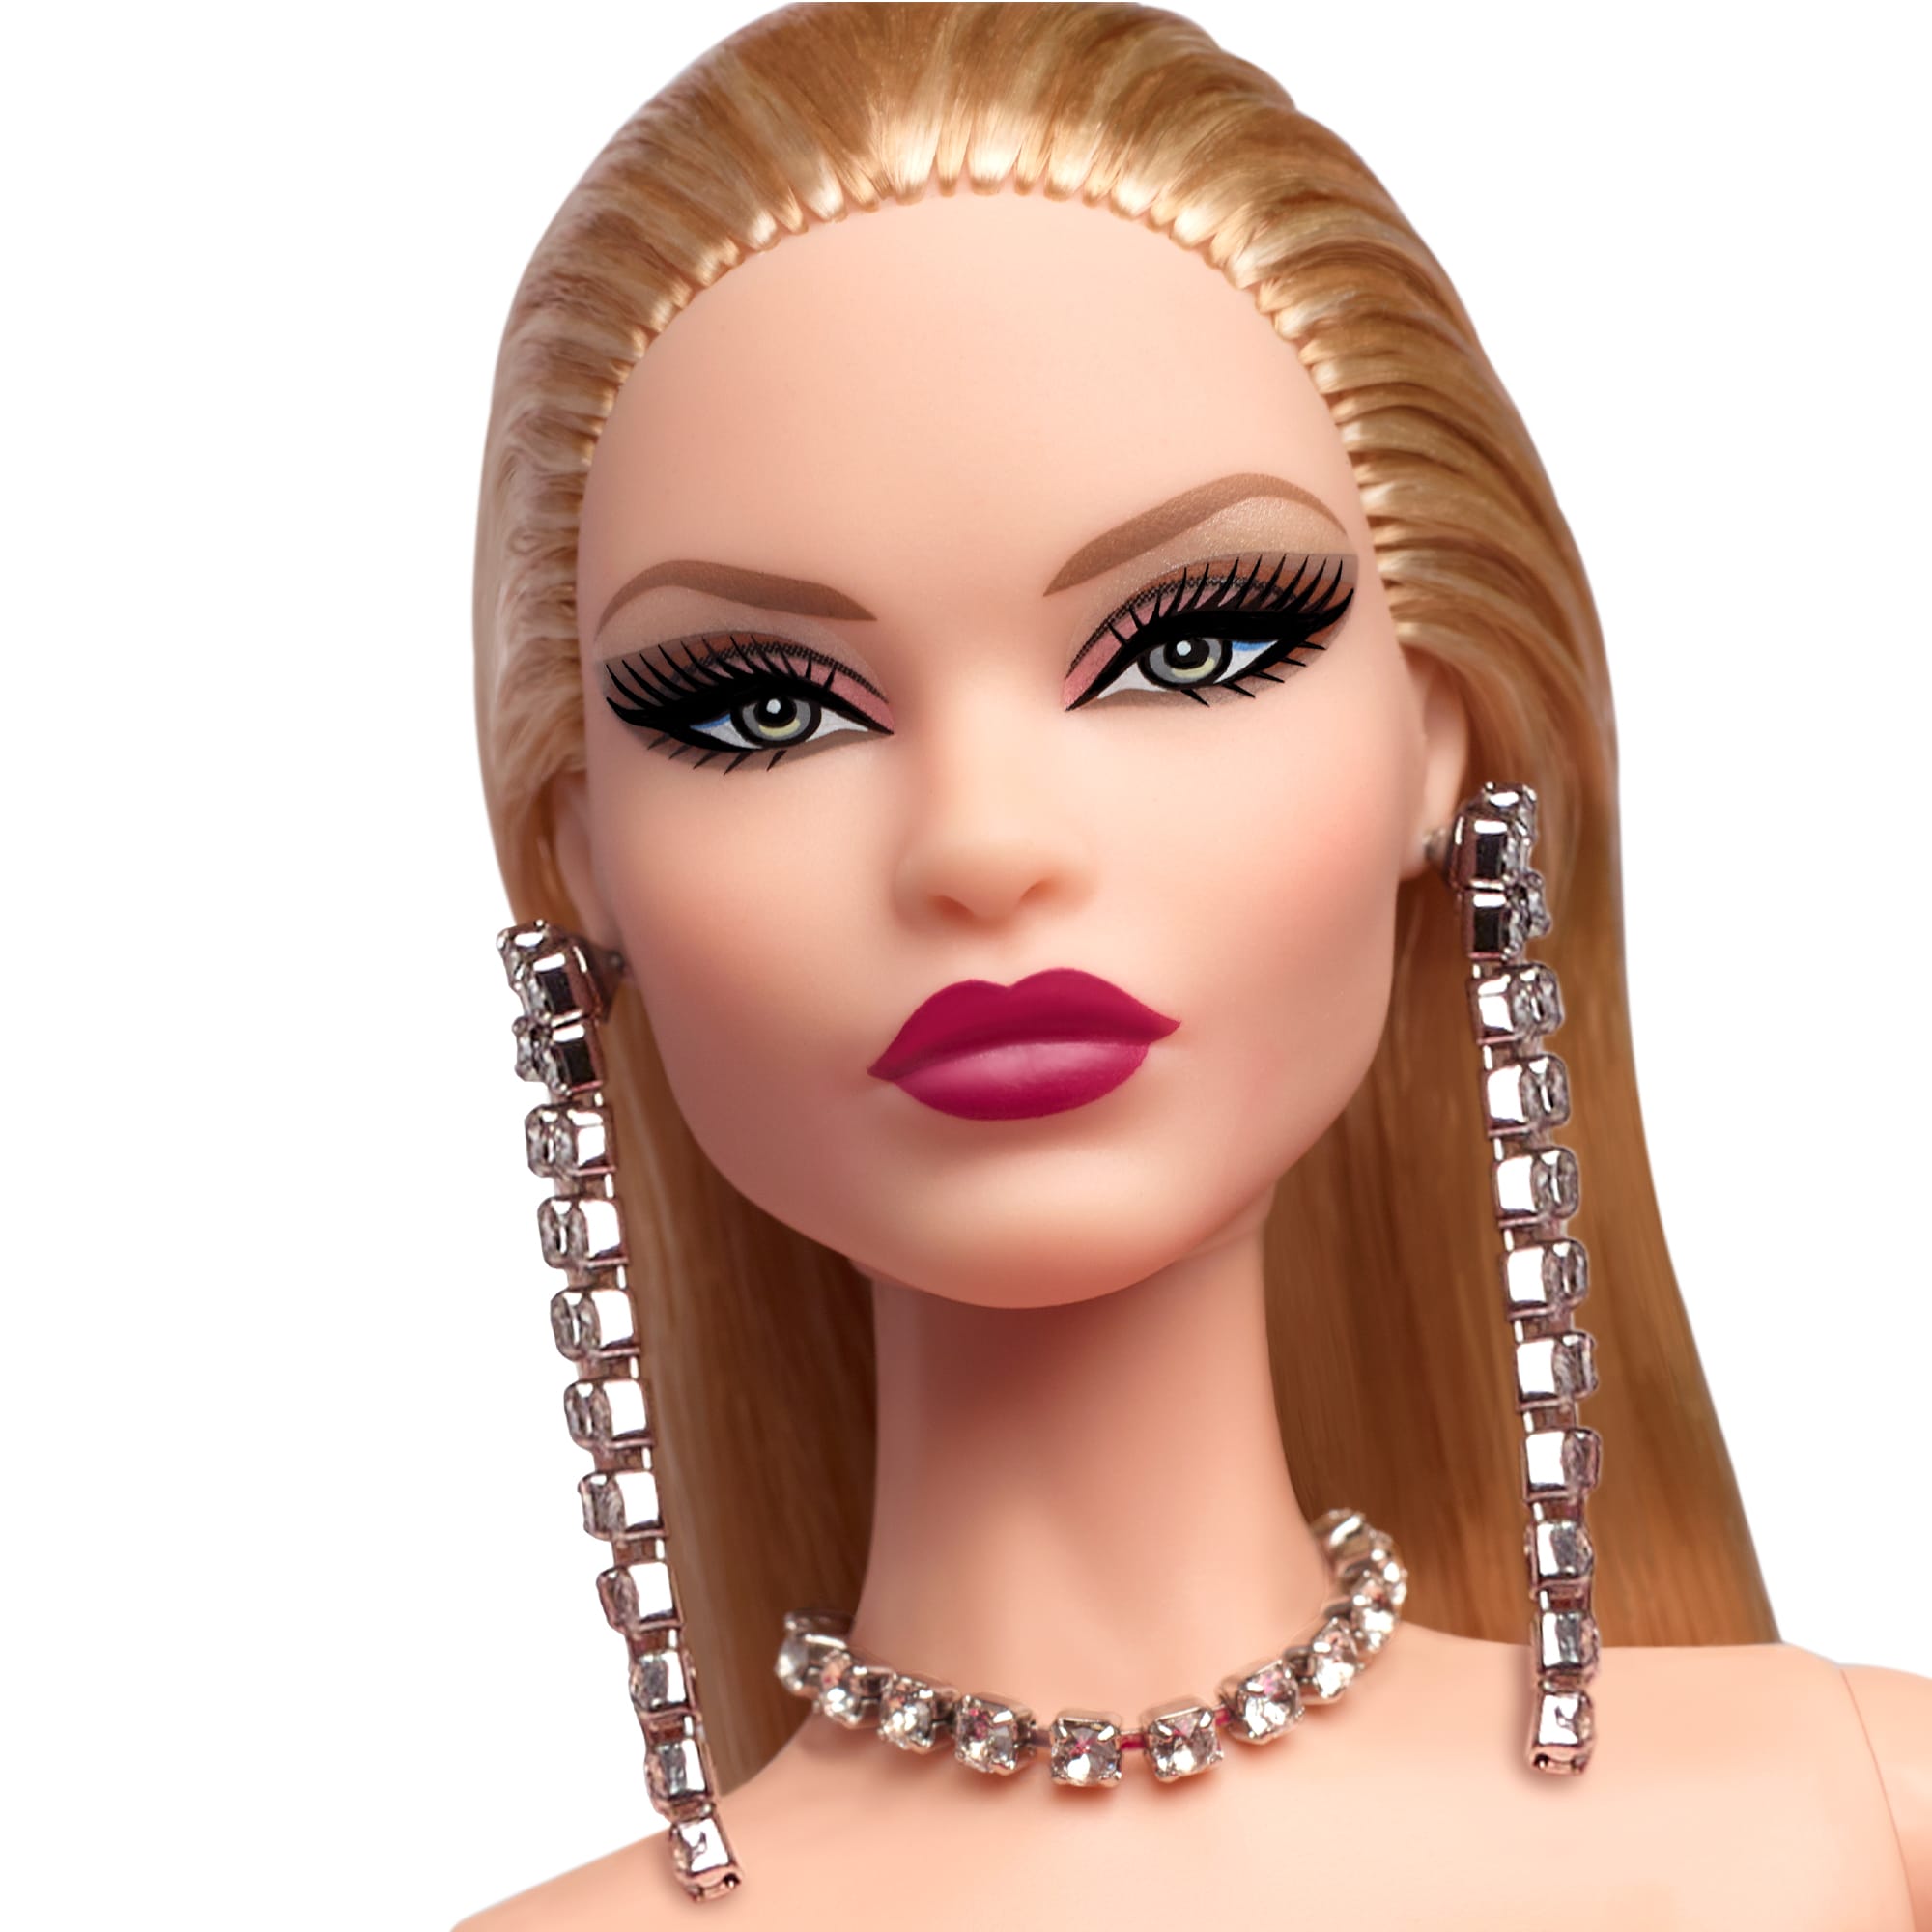 Barbie Styled by Design Doll 1